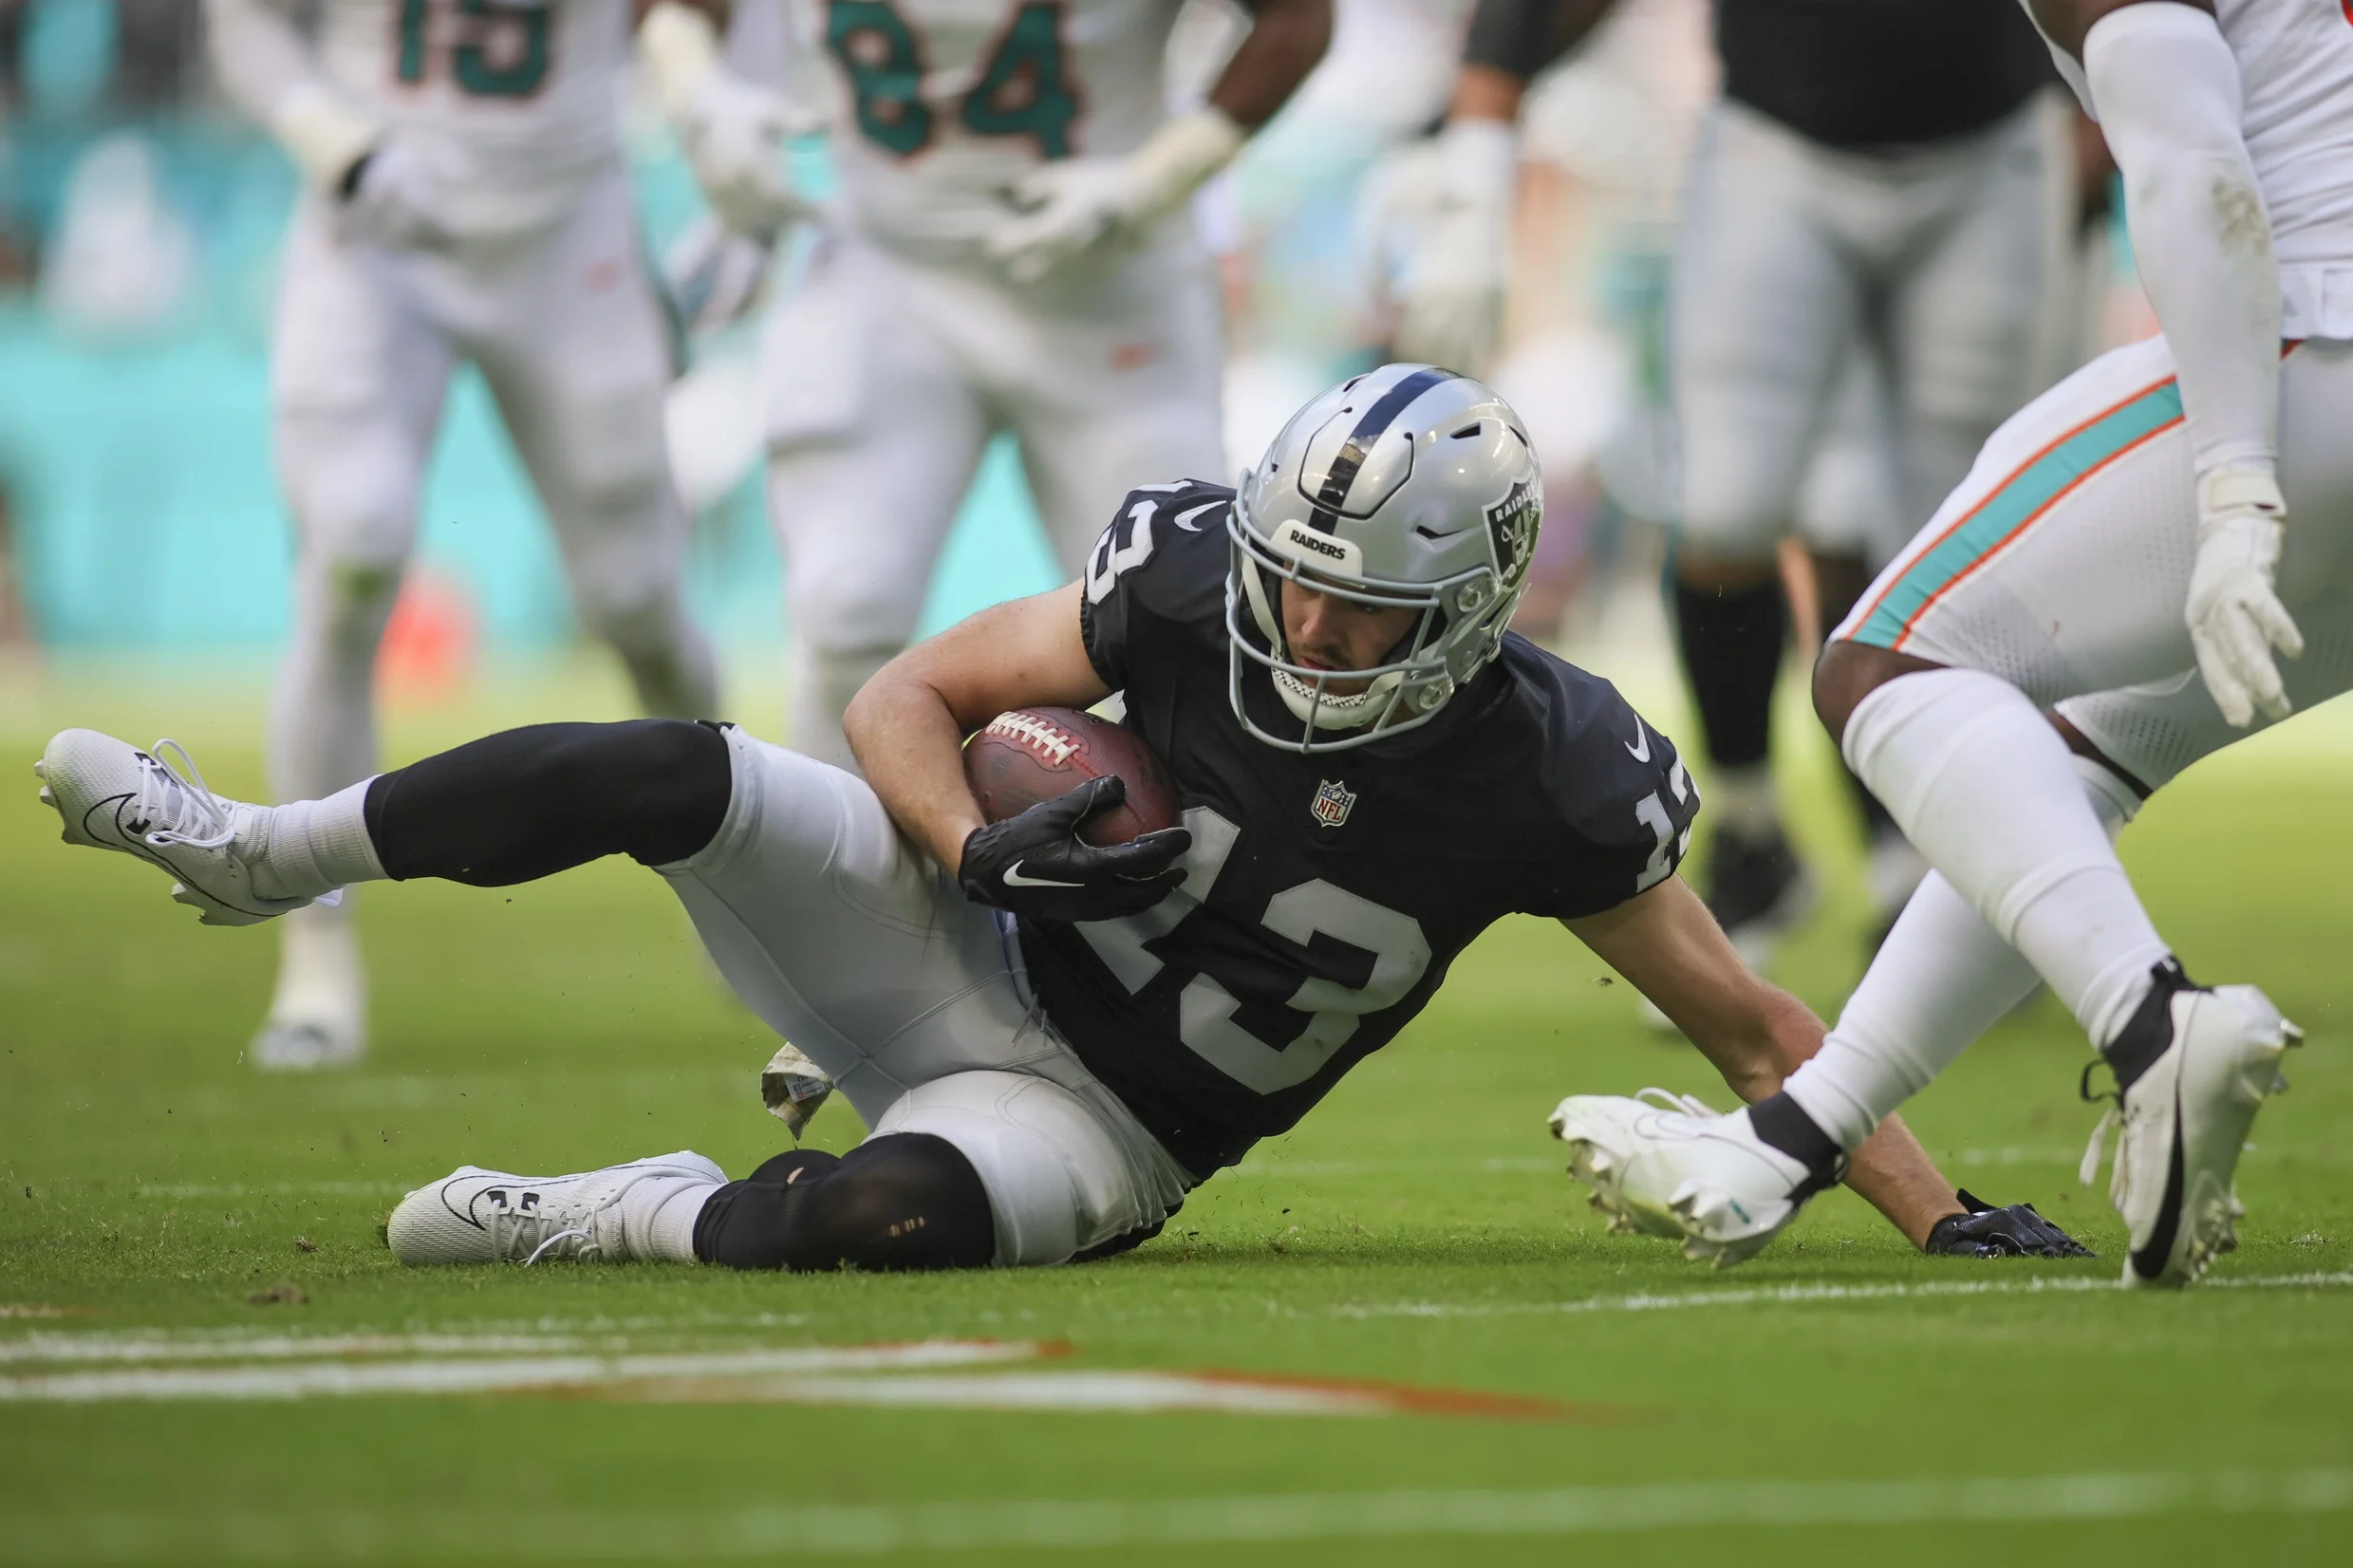 Chicago Bears Eyeing Addition of Hunter Renfrow to Bolster Receiving Corps